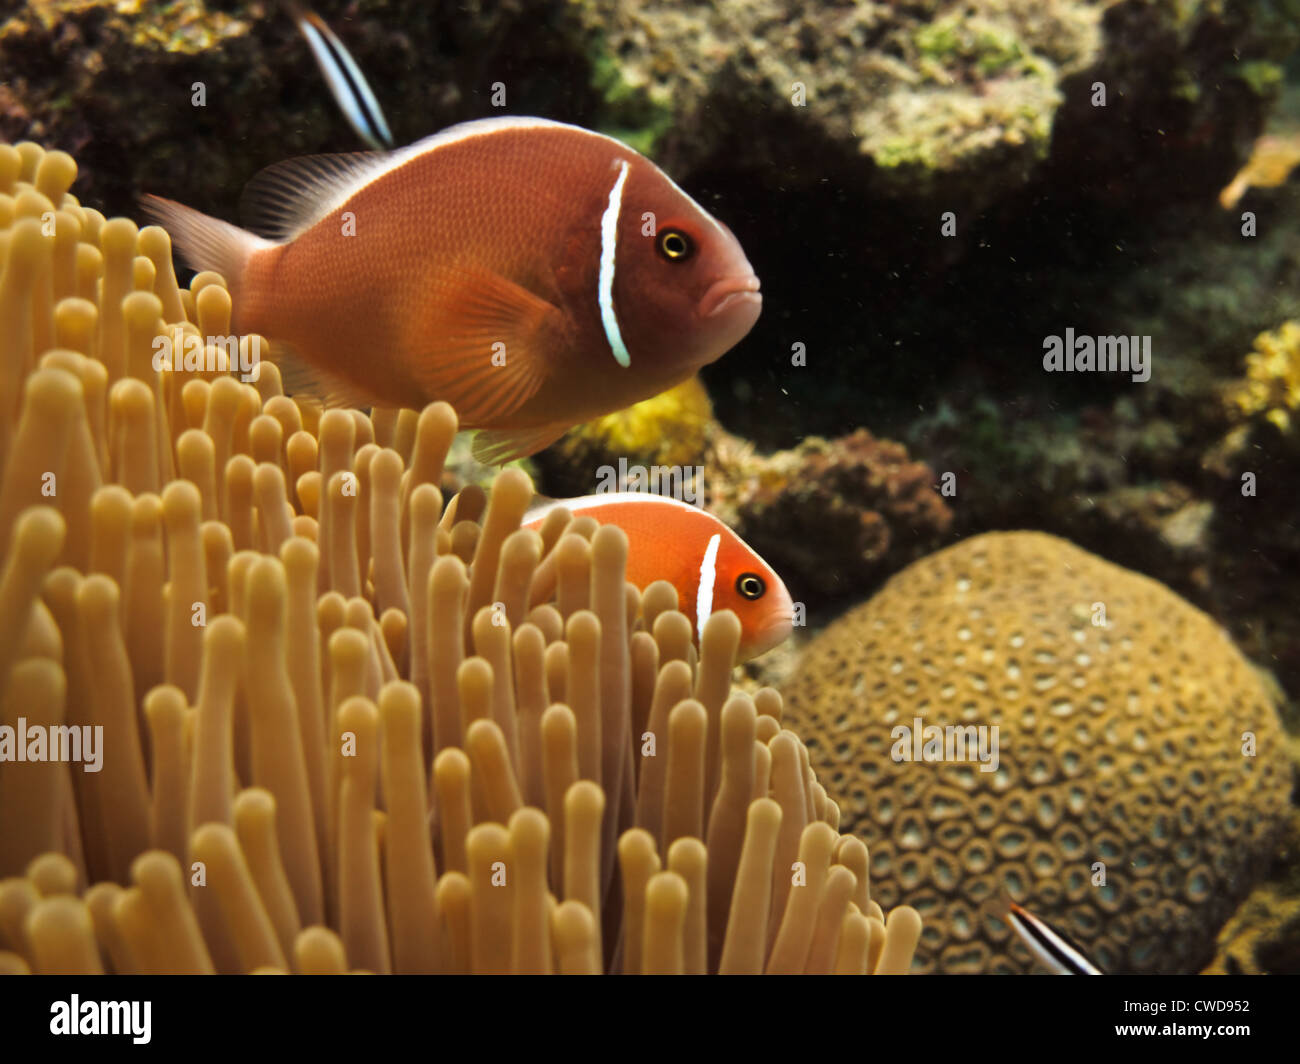 Orange clown fish swimming amidst brain coral and other hard stony coral in Challenger Bay on the Great Barrier Reef Australia Stock Photo